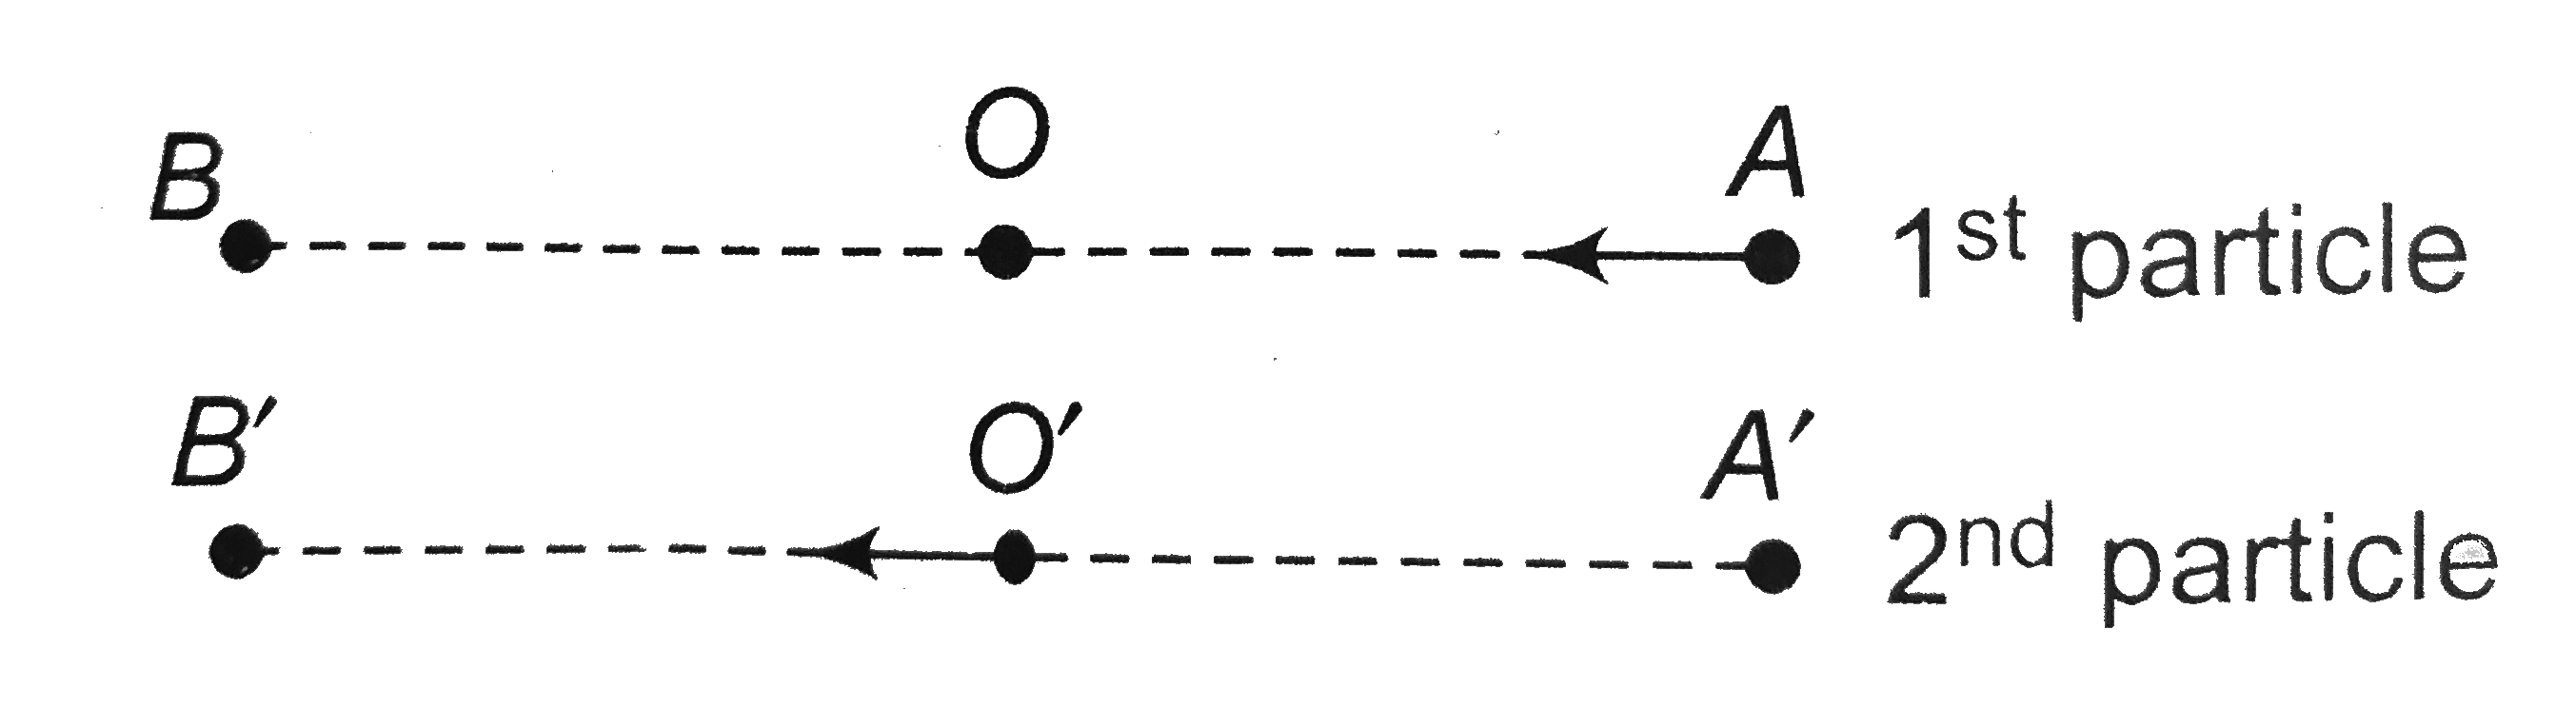 Two particle undergoes SHM along parallel line with the same time period (T) and equal amplitude At a particular instant , one particle is at its extereme position while the other is at its mean position .They move in the same direction .They will cross each other after a further time